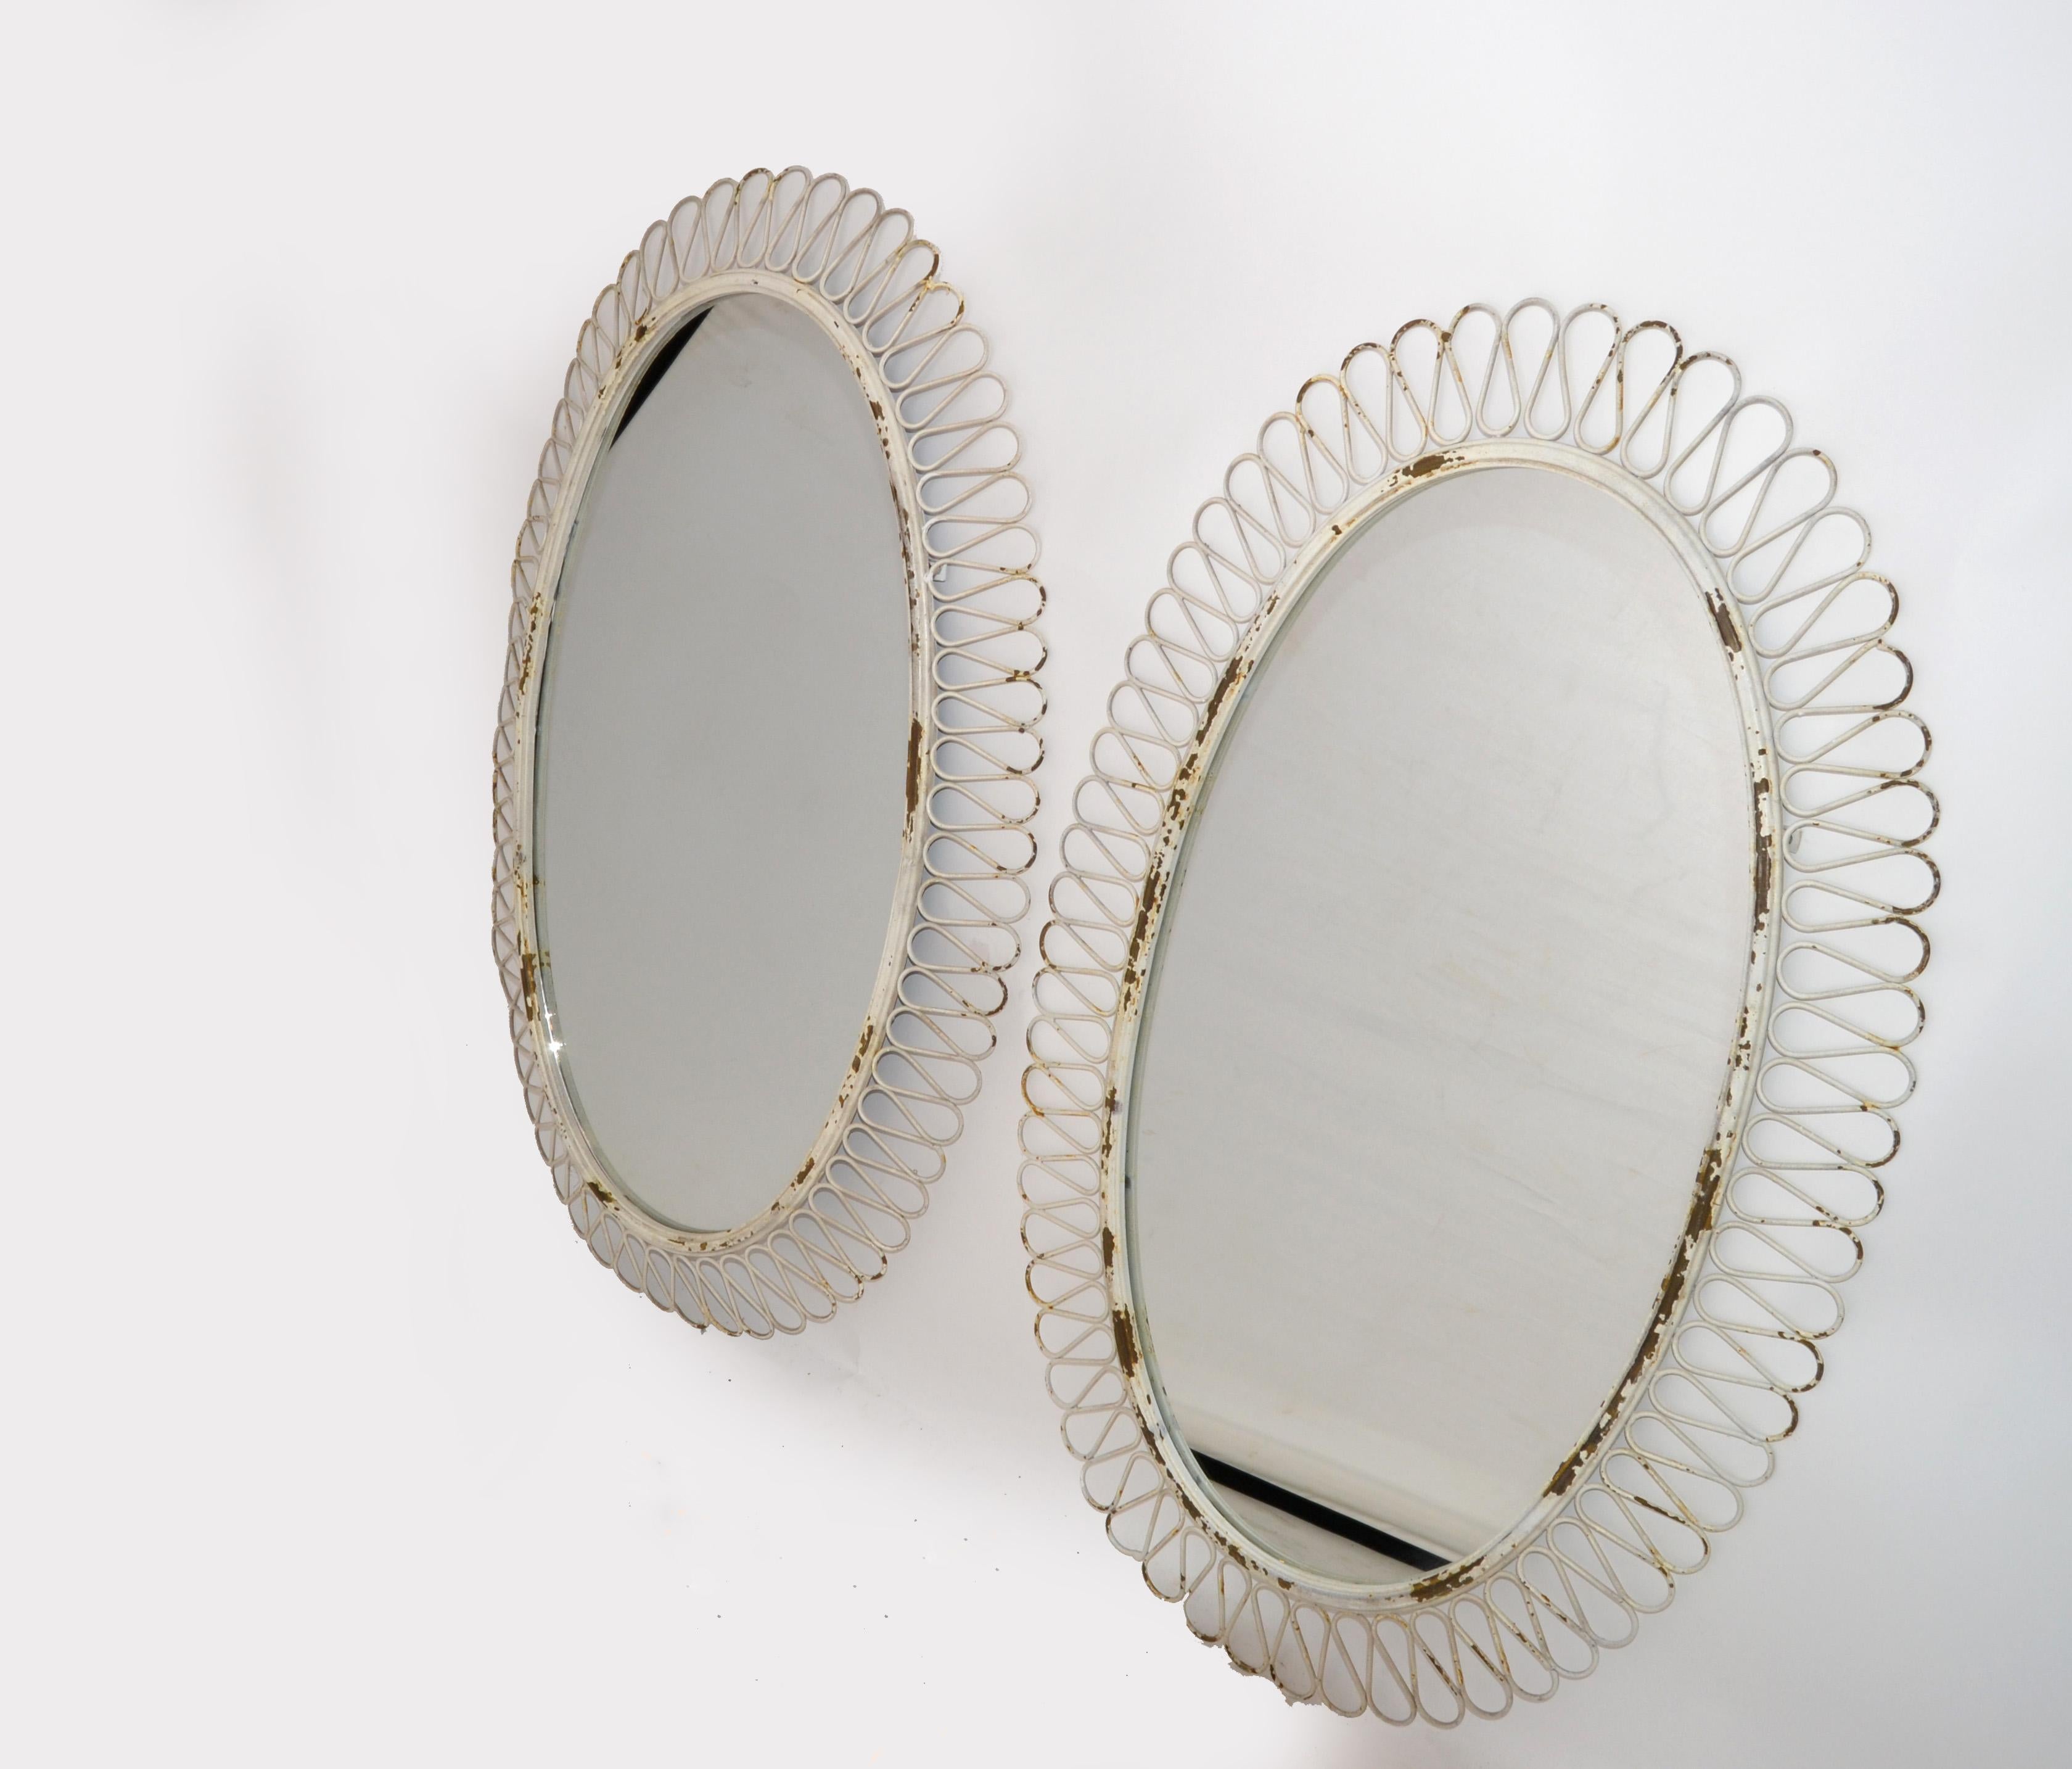 1950s French distressed antique white wrought iron wall mirror or console mirror Art Deco style.
Handcrafted wrought iron border around the oval mirror.
Secure Hanging construction on the reverse.
Stunning craftsmanship made in France.
Mirror